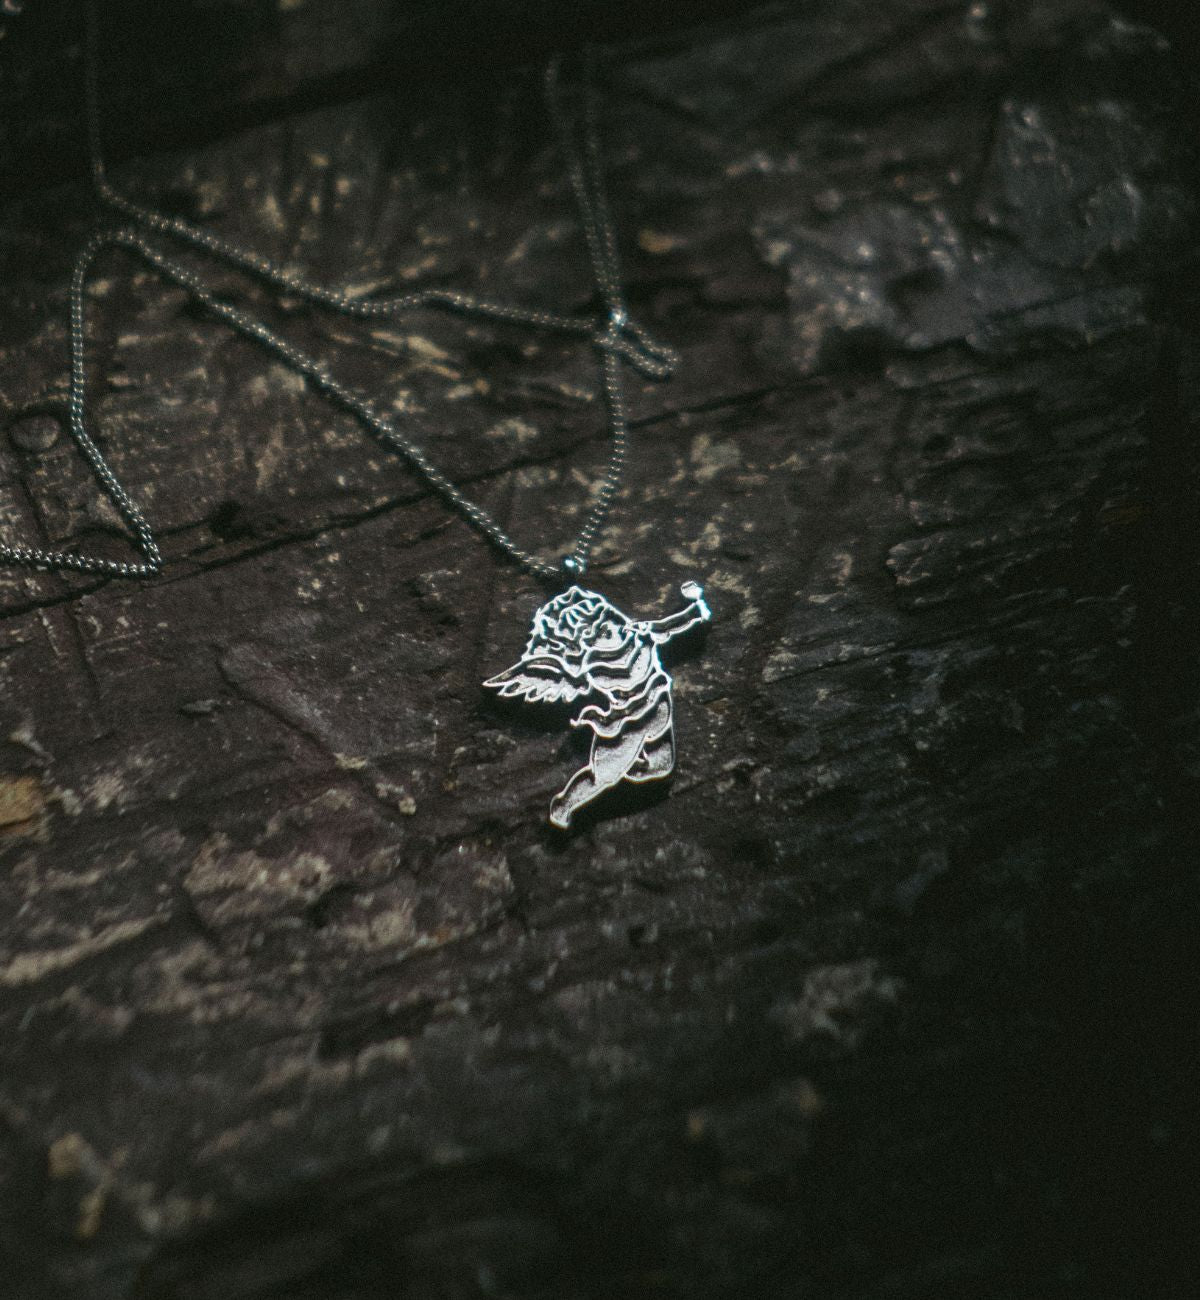 Selfish Sons x Discotonic 'Cupid Chain' | LIMITED EDITION